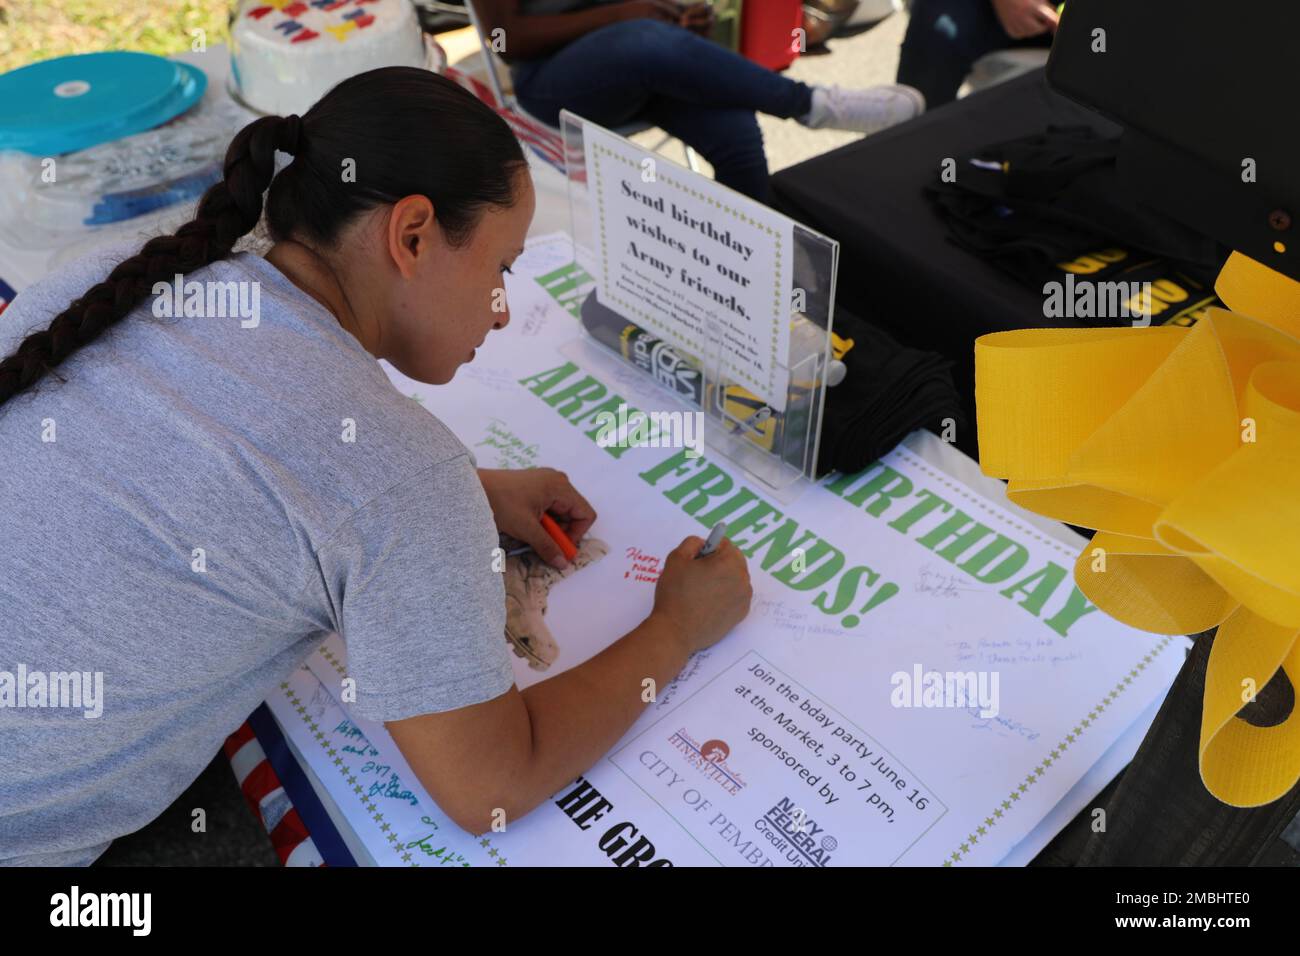 Natalie Dean, a member of the Hinesville community, signs a birthday card for the United States Army at the Hinesville Downtown Farmers Market as part of the local celebration of the Army's birthday in Hinesville, Georgia, June 16, 2022. The U.S. Army celebrates 247 years of 24/7 global readiness and the service of the people who make that capability possible. Stock Photo